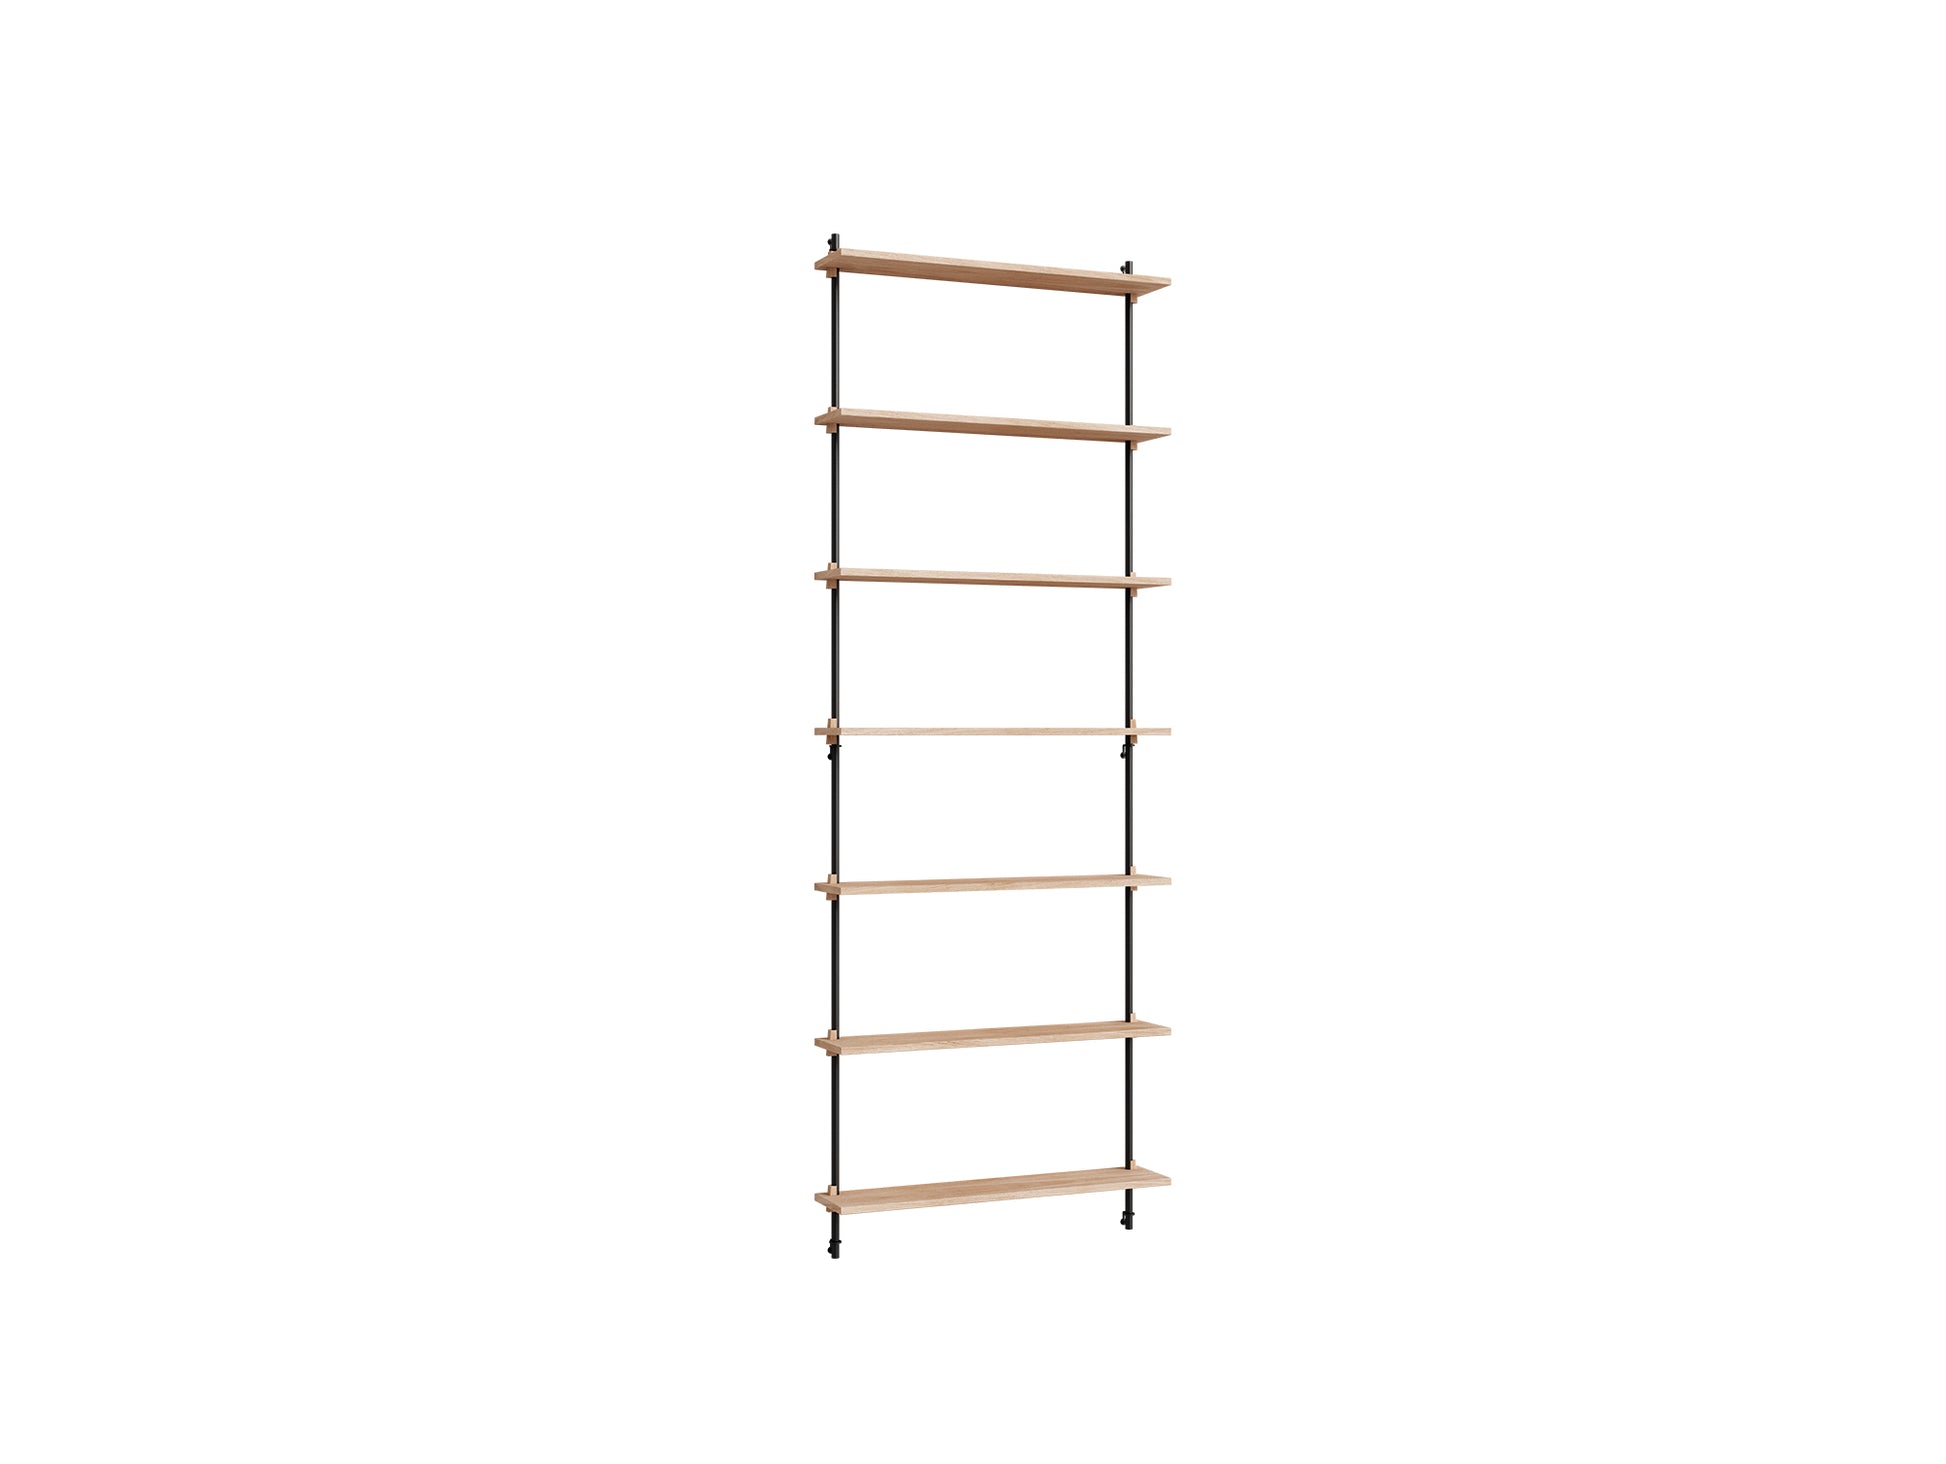 Wall Shelving System Sets (230 cm) by Moebe - WS.230.1 / Black Uprights / Oiled Oak